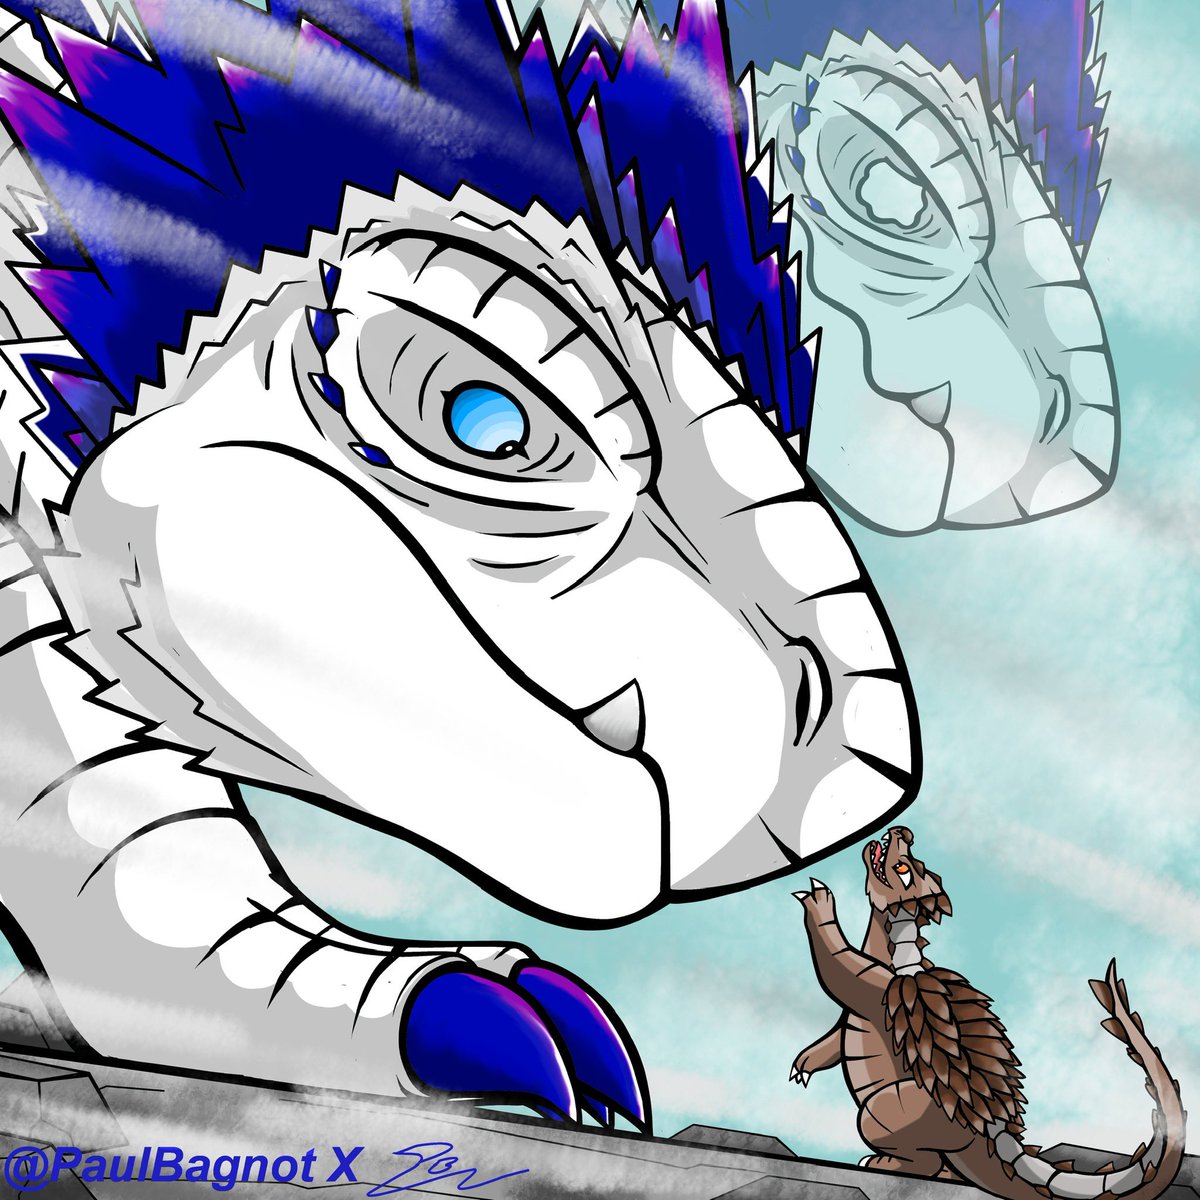 Baby anguirus finally found someone of his kind…maybe 

#MonsterVerse #MonarchGTeam #GodzillaKingOfTheMonsters #GodzillaDay #godzillaart #GodzillaMovie #GodzillaKingOfTheMonsters #godzillaxkongfanart #GodzillaXKongTheNewEmpire #Anguirus #Shimo